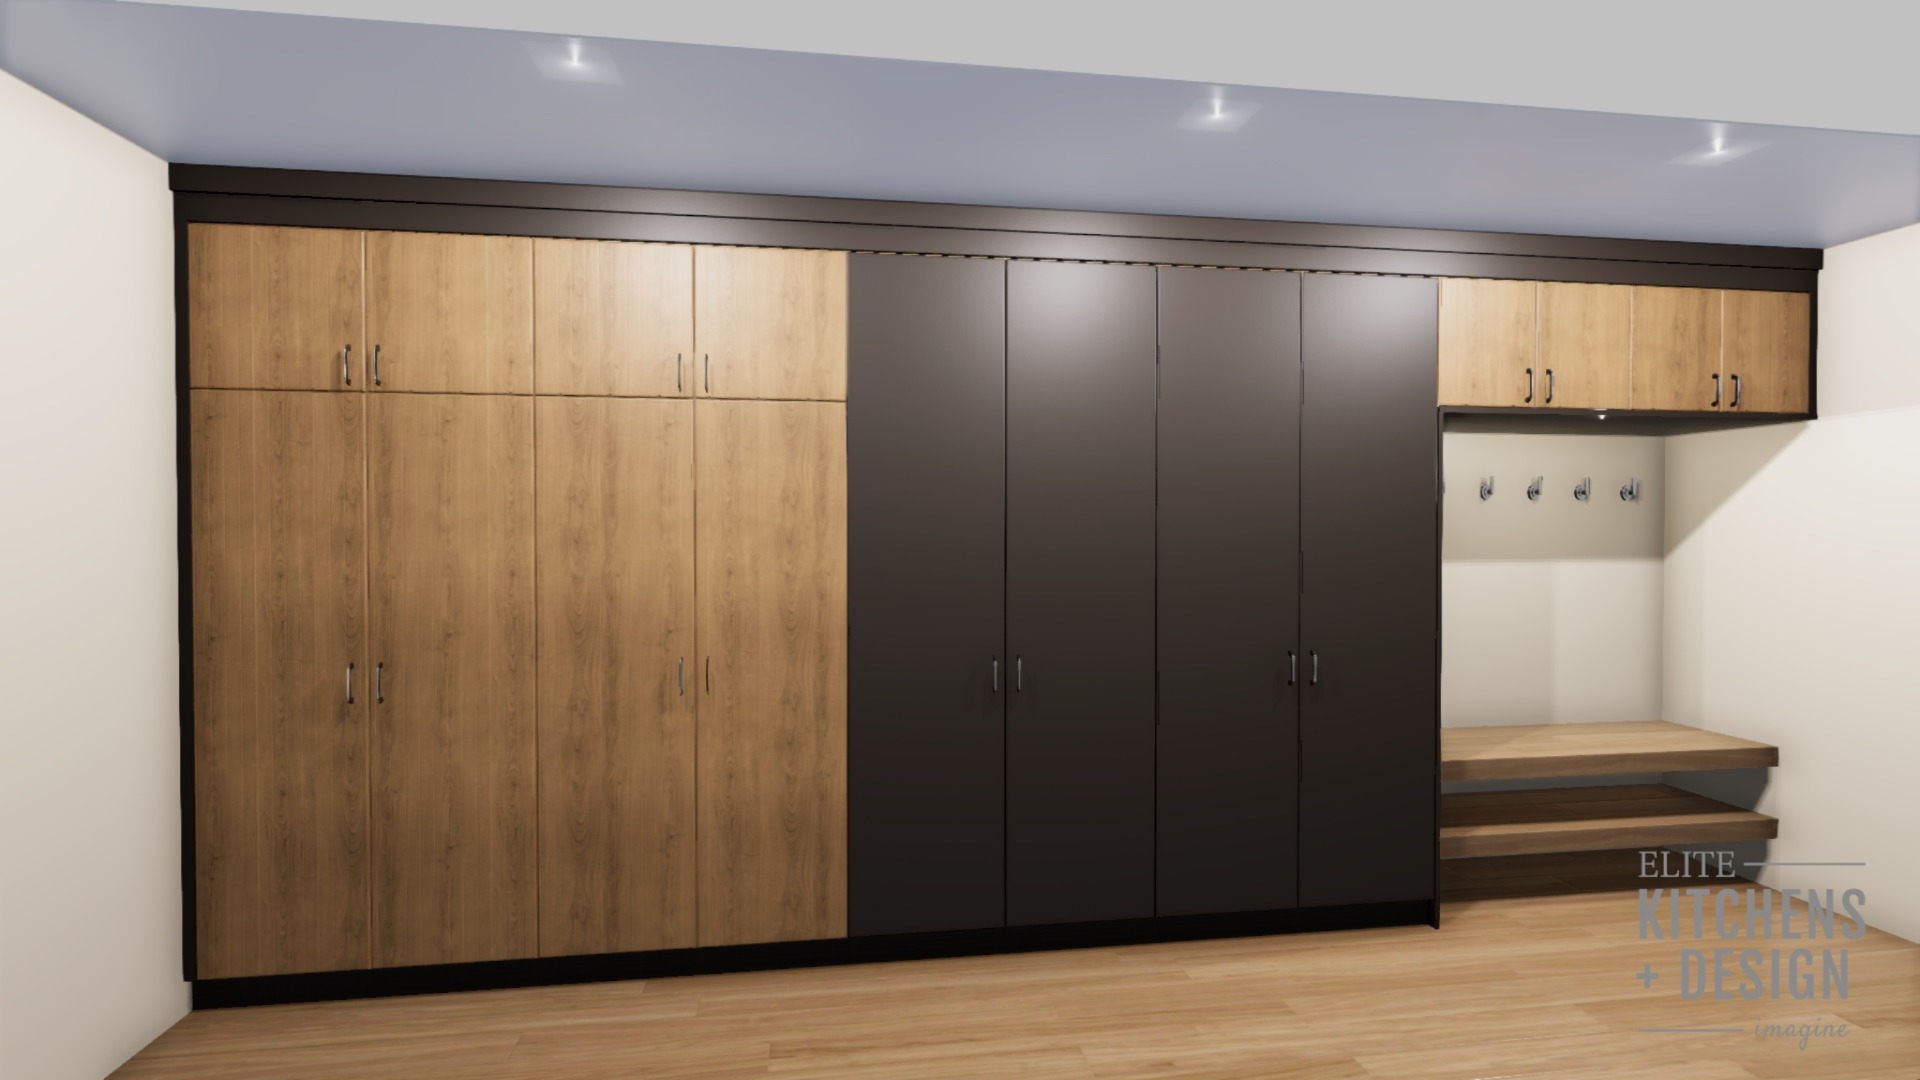 Modern interior design featuring light wooden and dark cabinets, integrated lighting, and bench seating with a built-in coat rack area. Clean and sleek aesthetic.